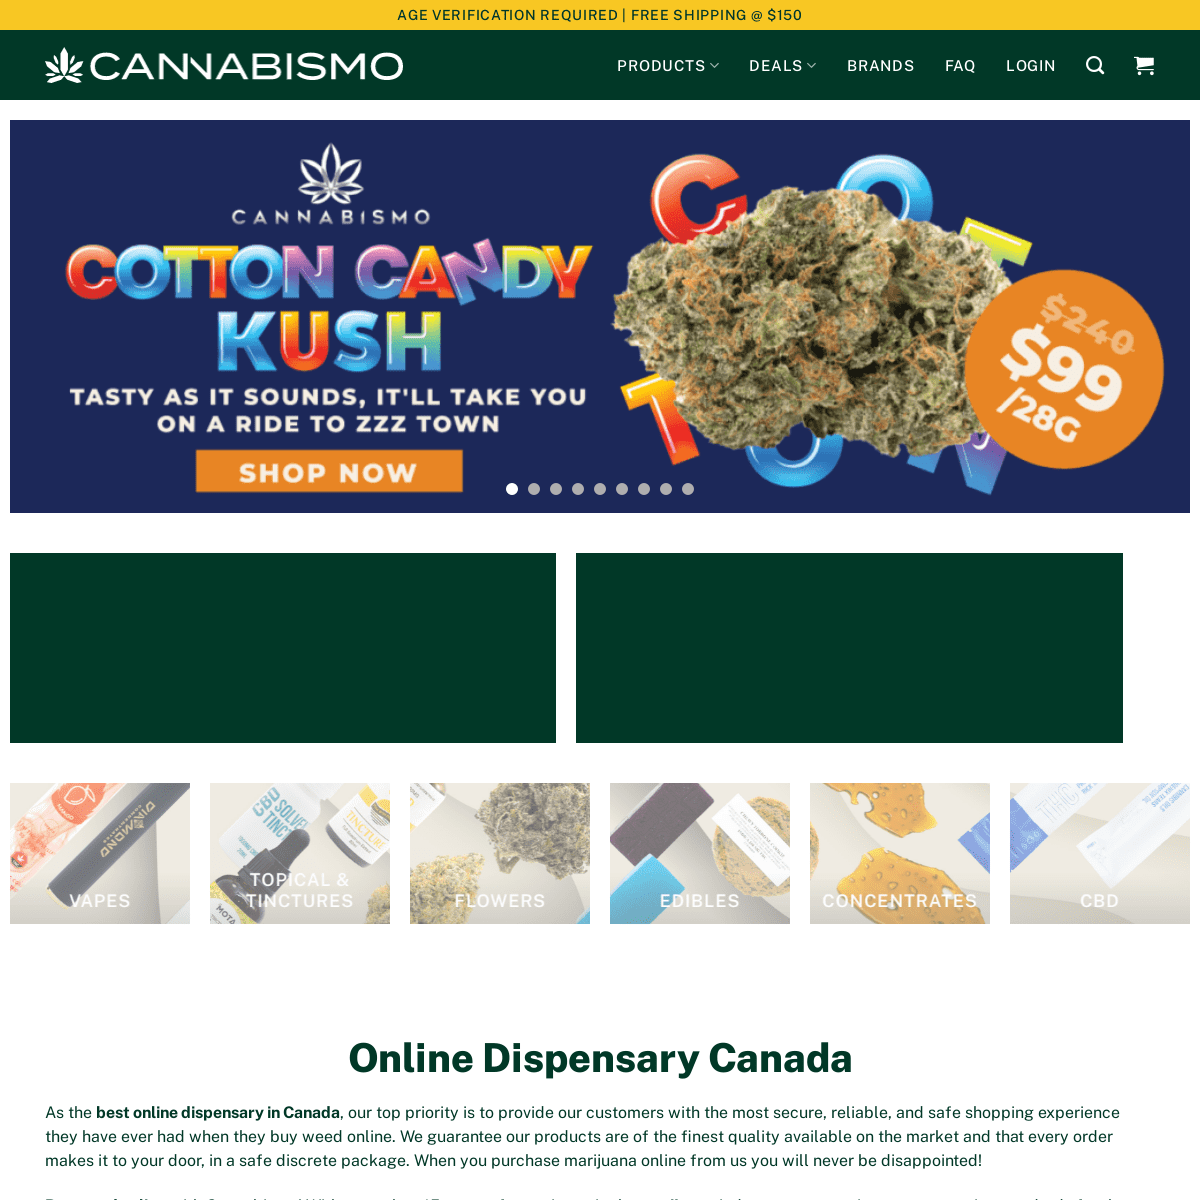 A complete backup of https://cannabismo.org